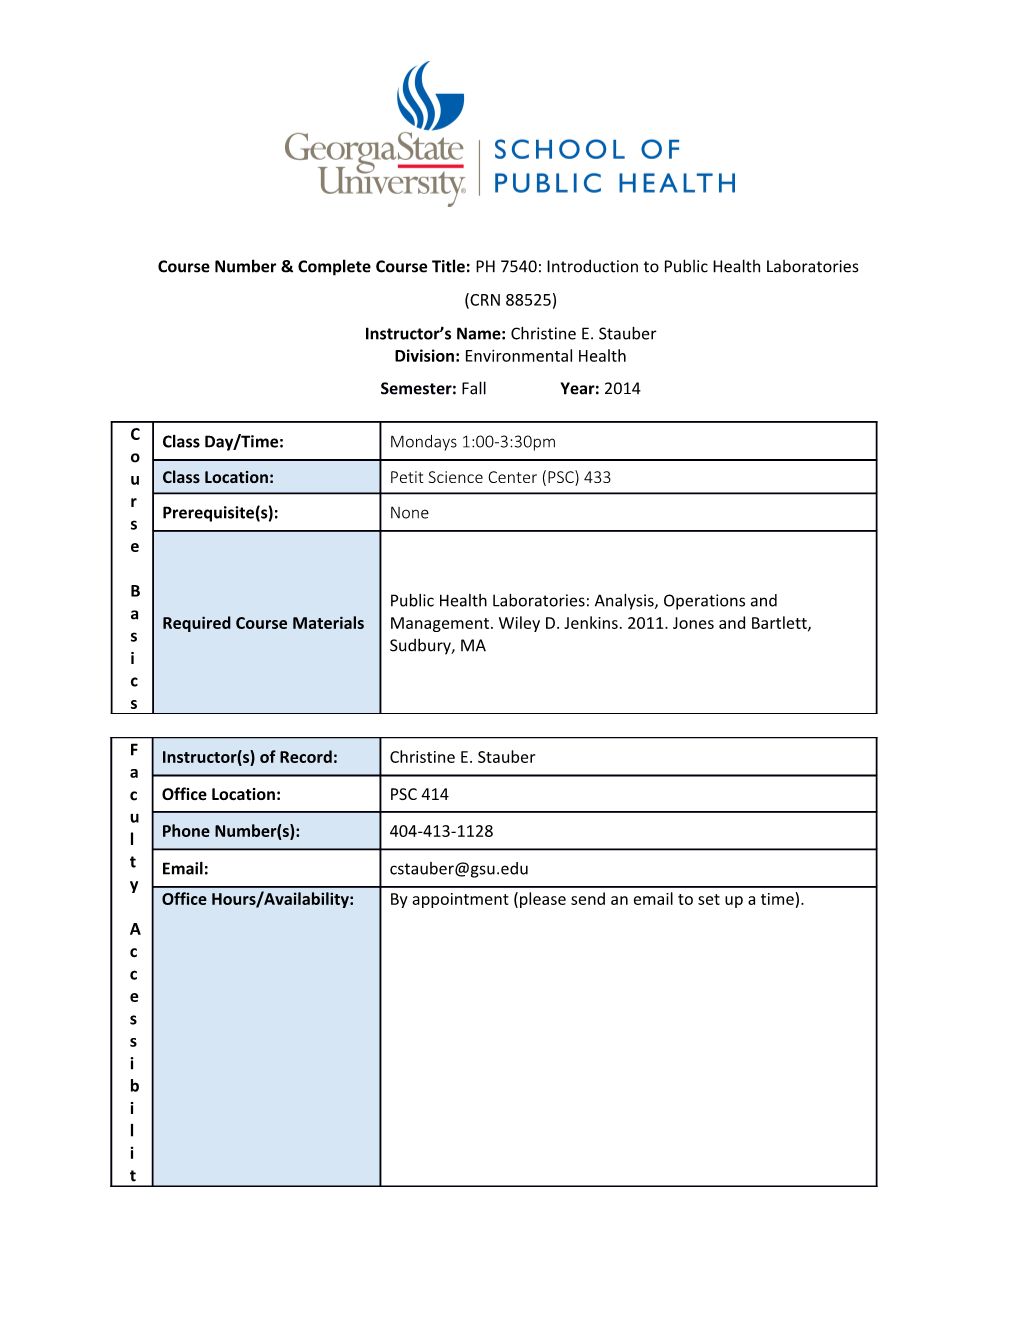 Course Number & Complete Course Title: PH 7540:Introduction to Public Health Laboratories